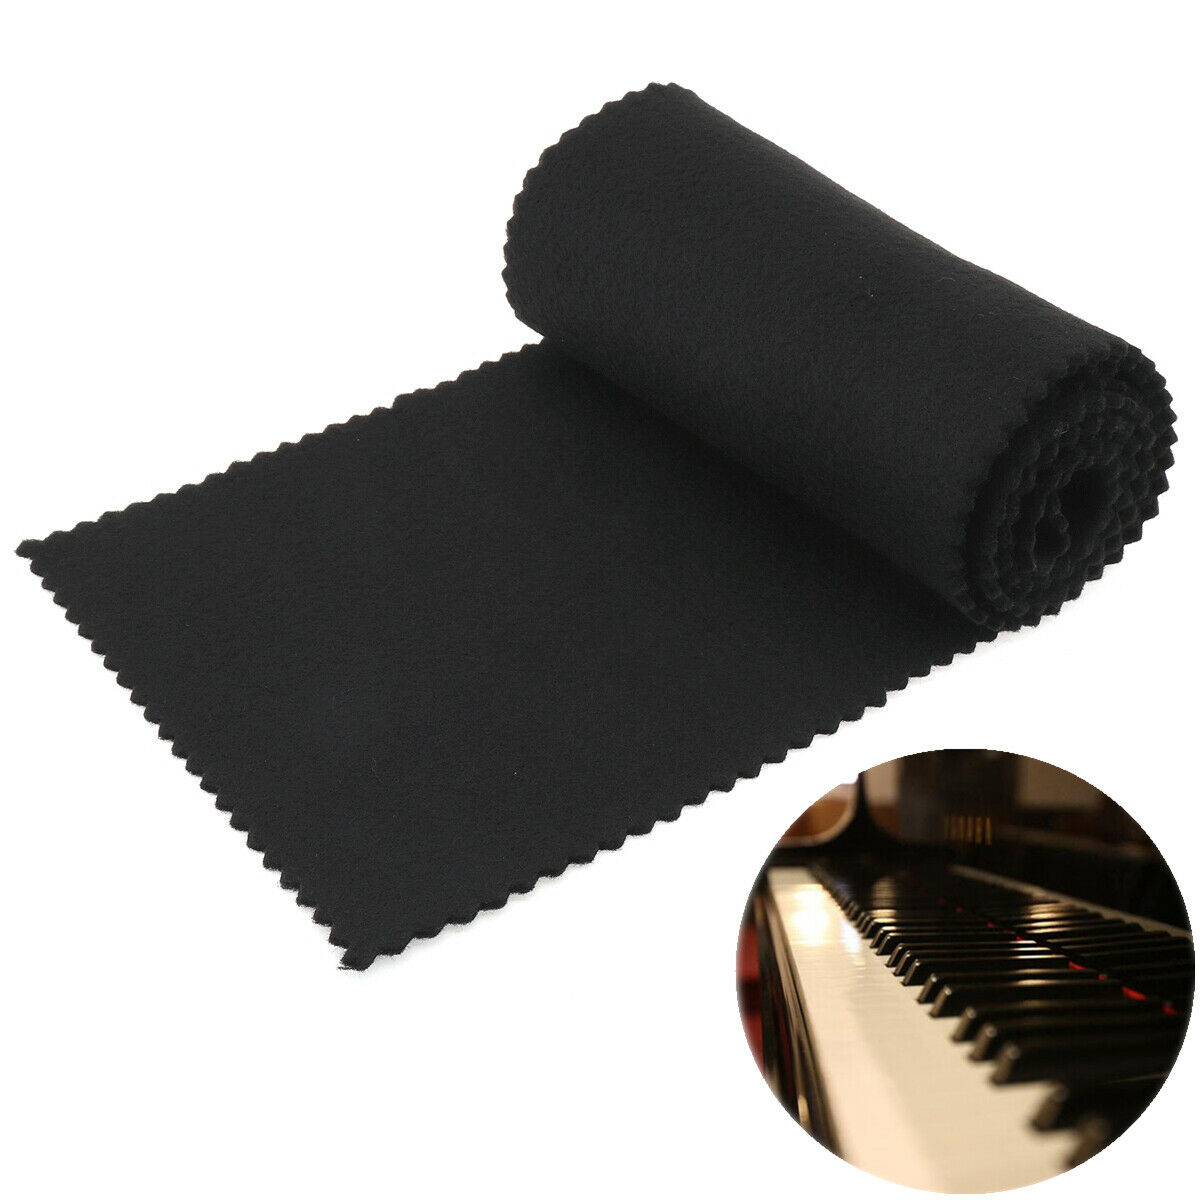 Black Soft Flannel Piano Key Cover Keyboard Dust Cover 119 X 14cm For 88 Key